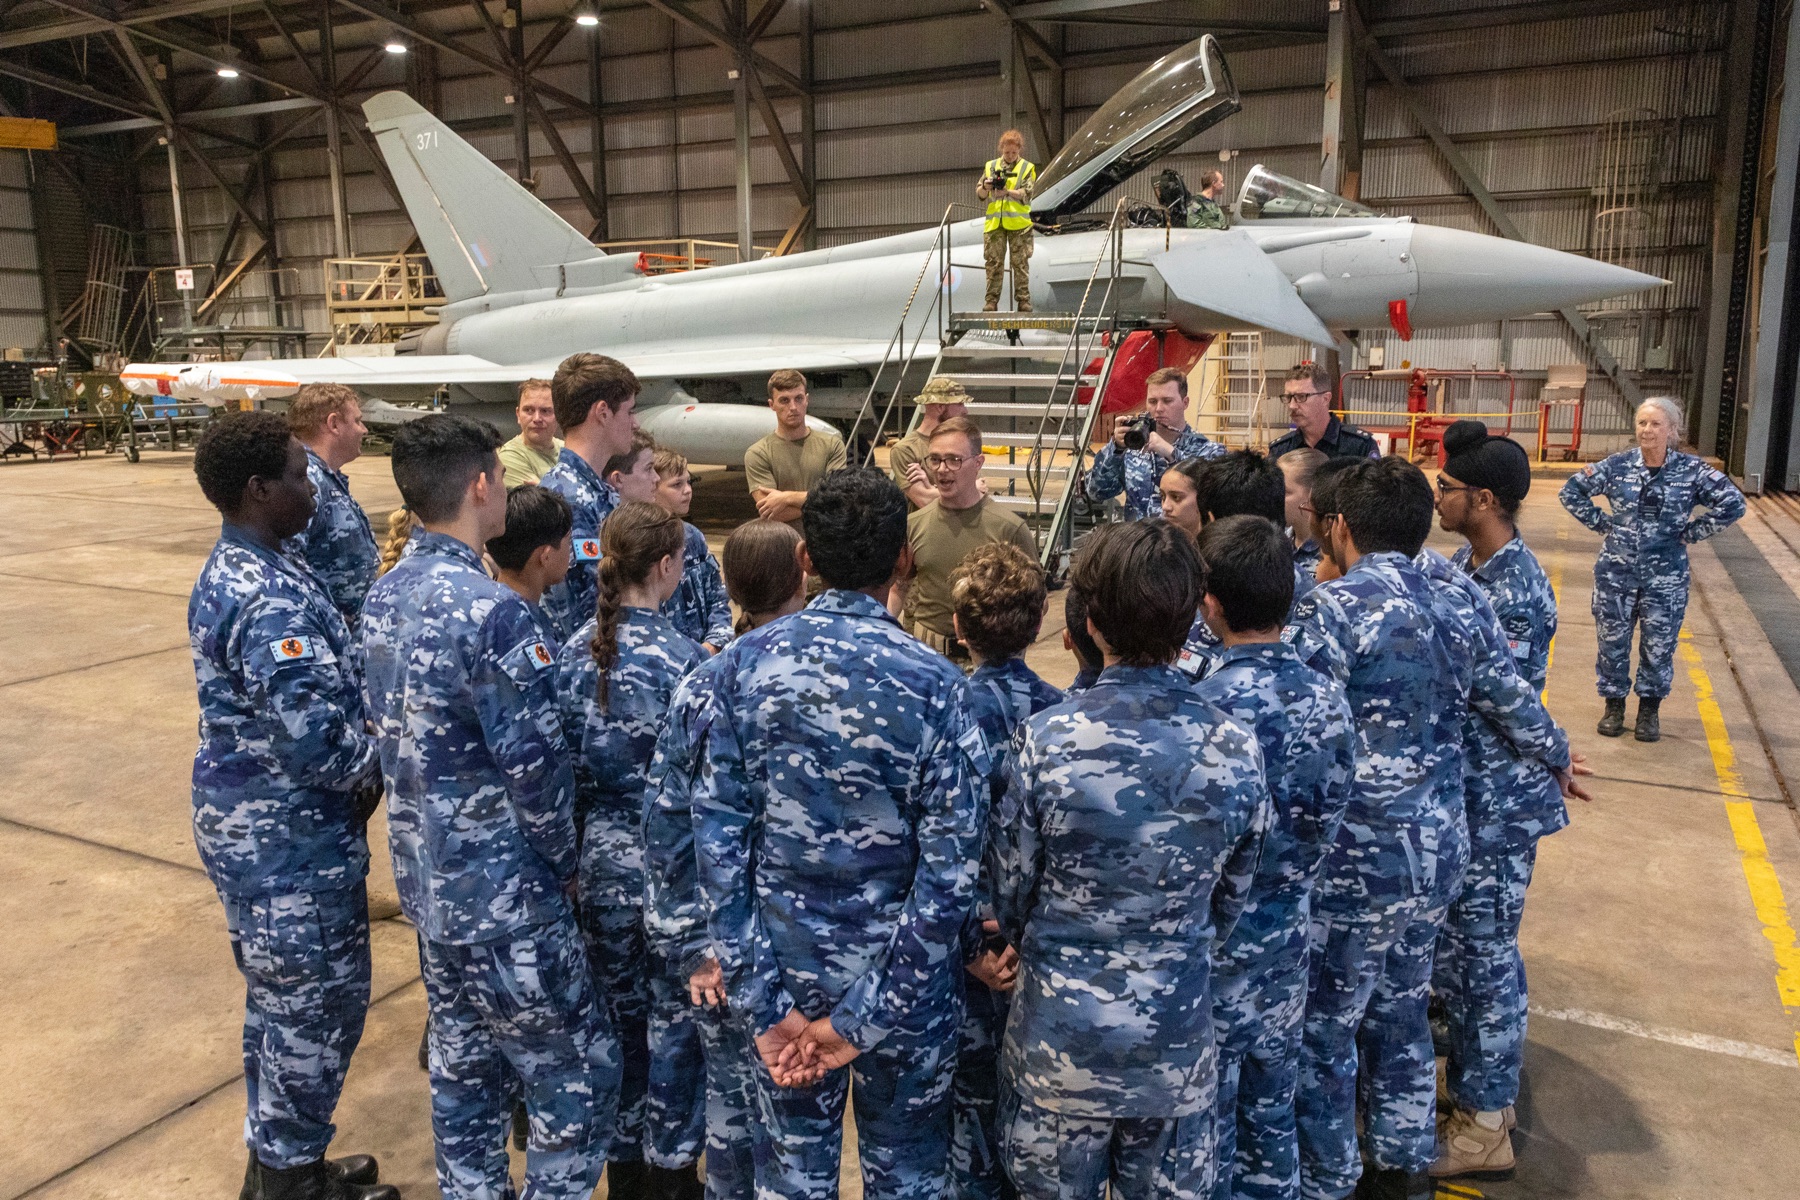 Image shows group of Royal Australian Air Force personnel in hangar with RAF Typhoon in background.